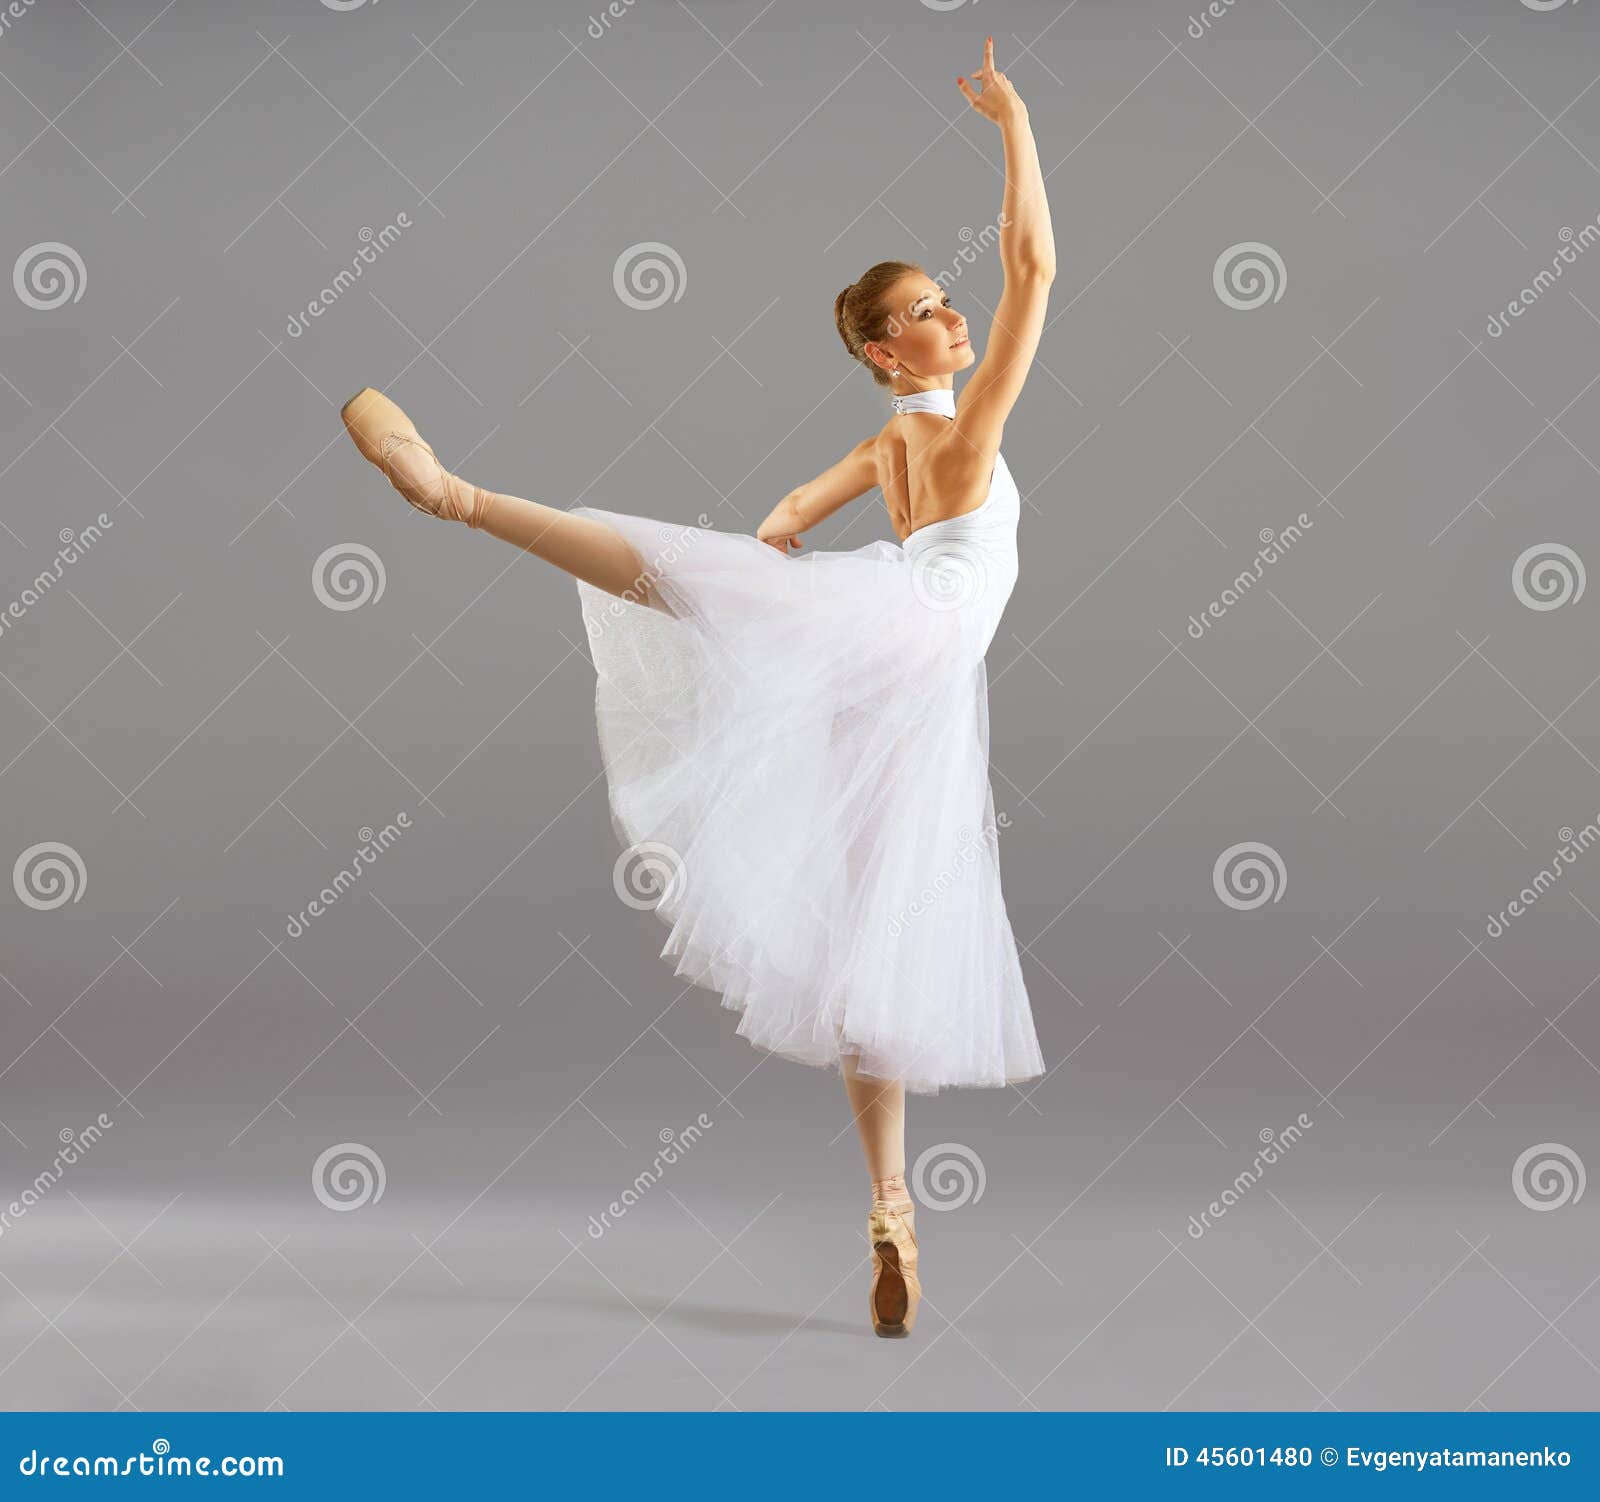 Classical female ballet dancer, Claire Wilson, in a white tutu in the photo  studio on a grey backgrou… | Dance picture poses, Ballet poses, Ballet  dance photography